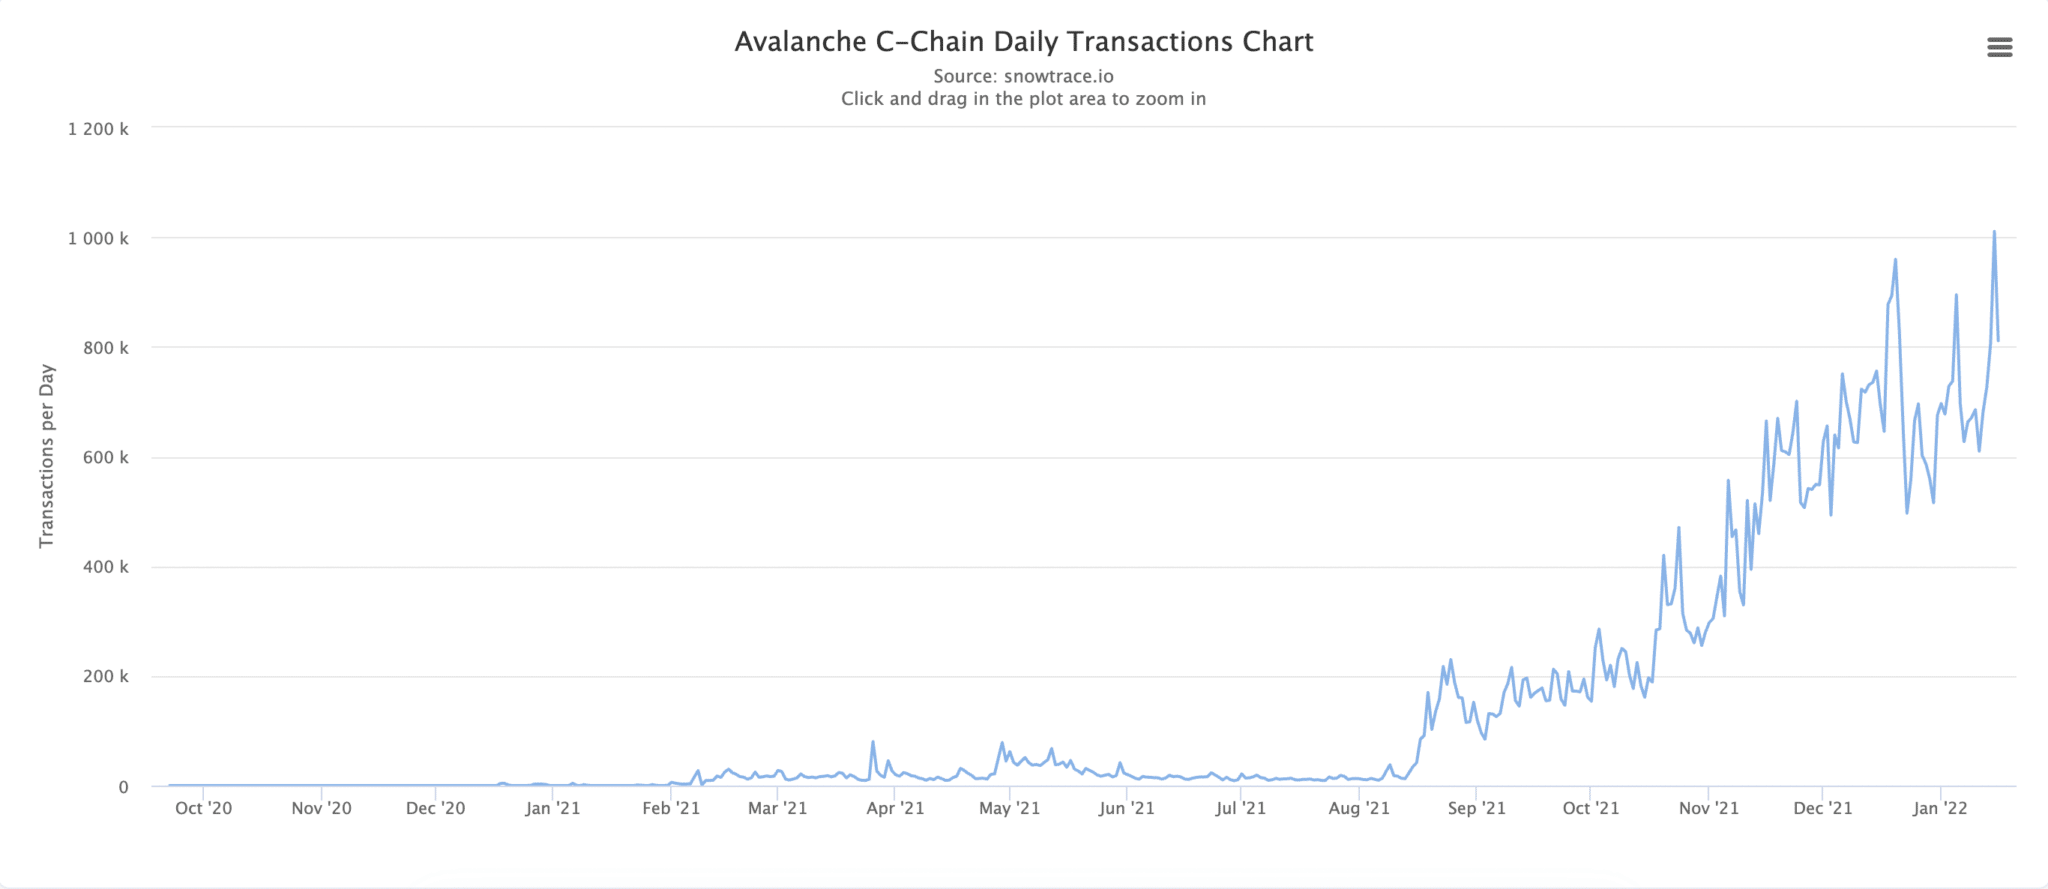 Avalanche C-Chain Daily Transactions (Source: snowtrace.io)